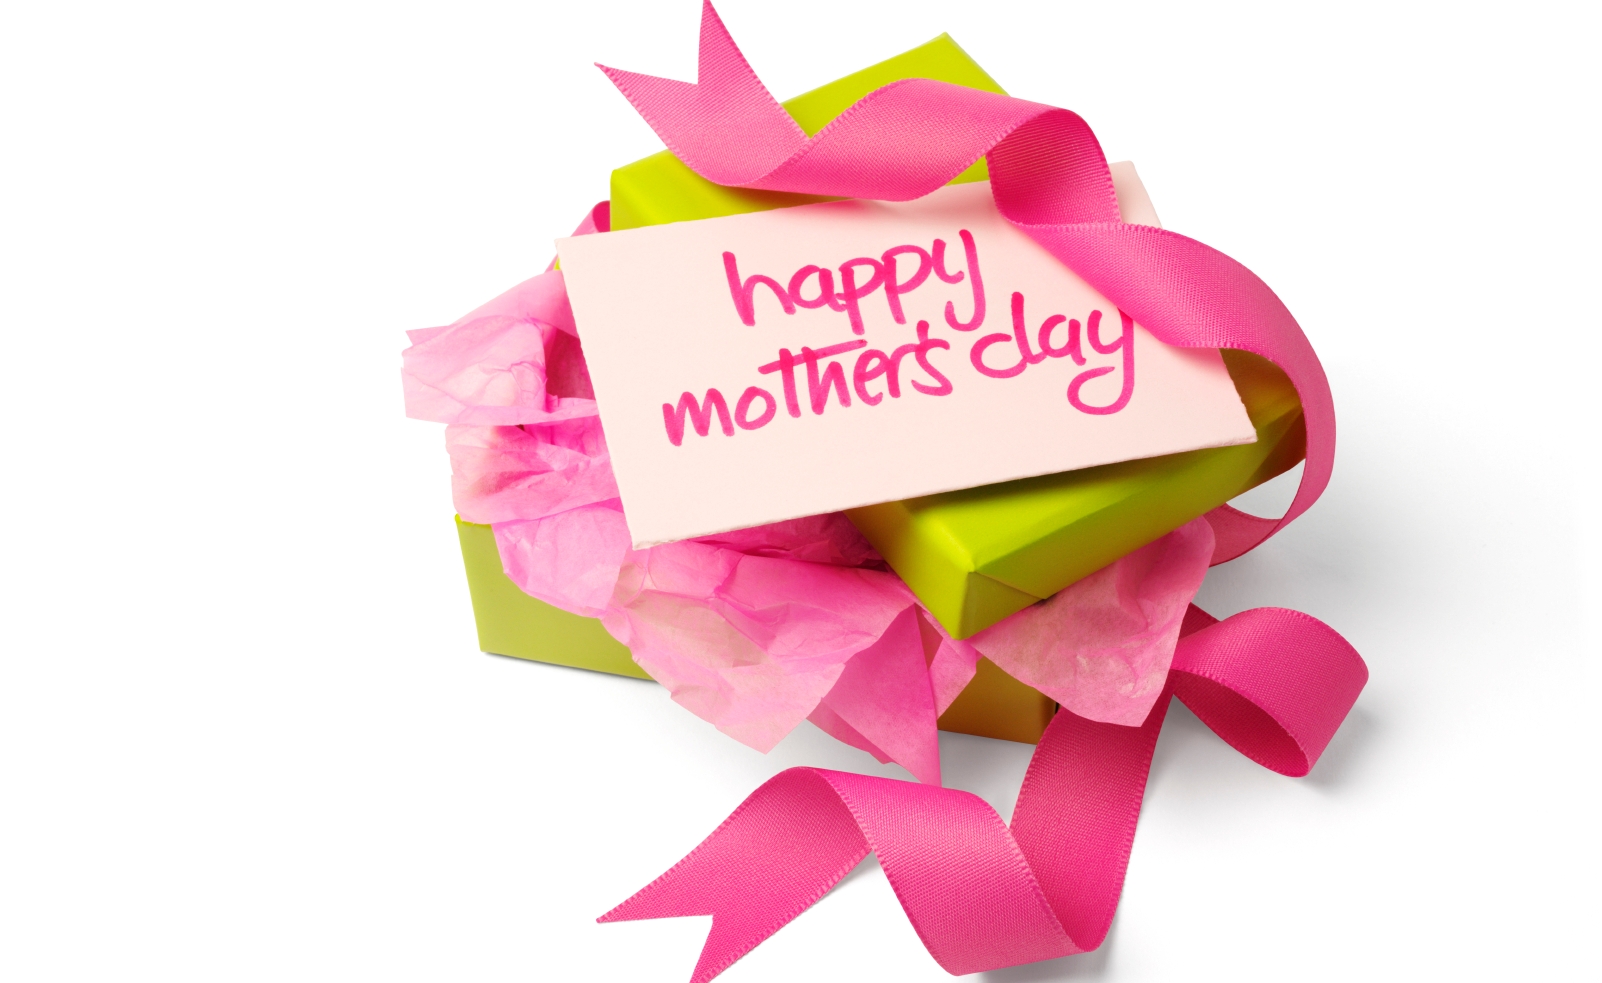 mothers-day-gift-image-for-lift1